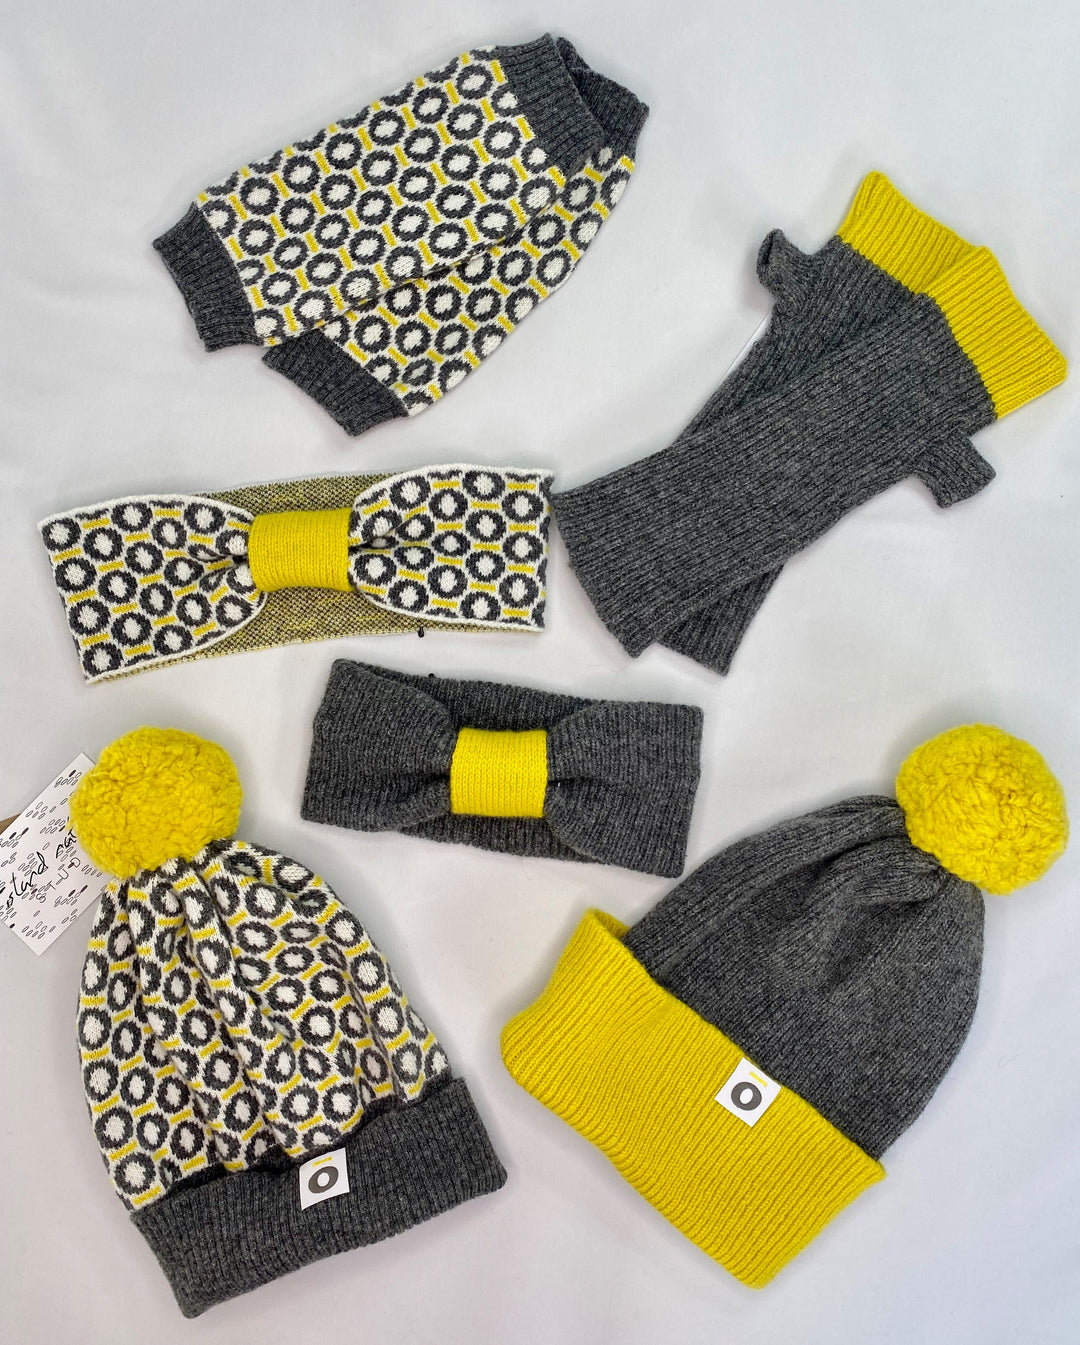 knitted accessories Scottish lambswool hats wrist warmers headbands charcoal yellow with St Columba Iona halo pattern